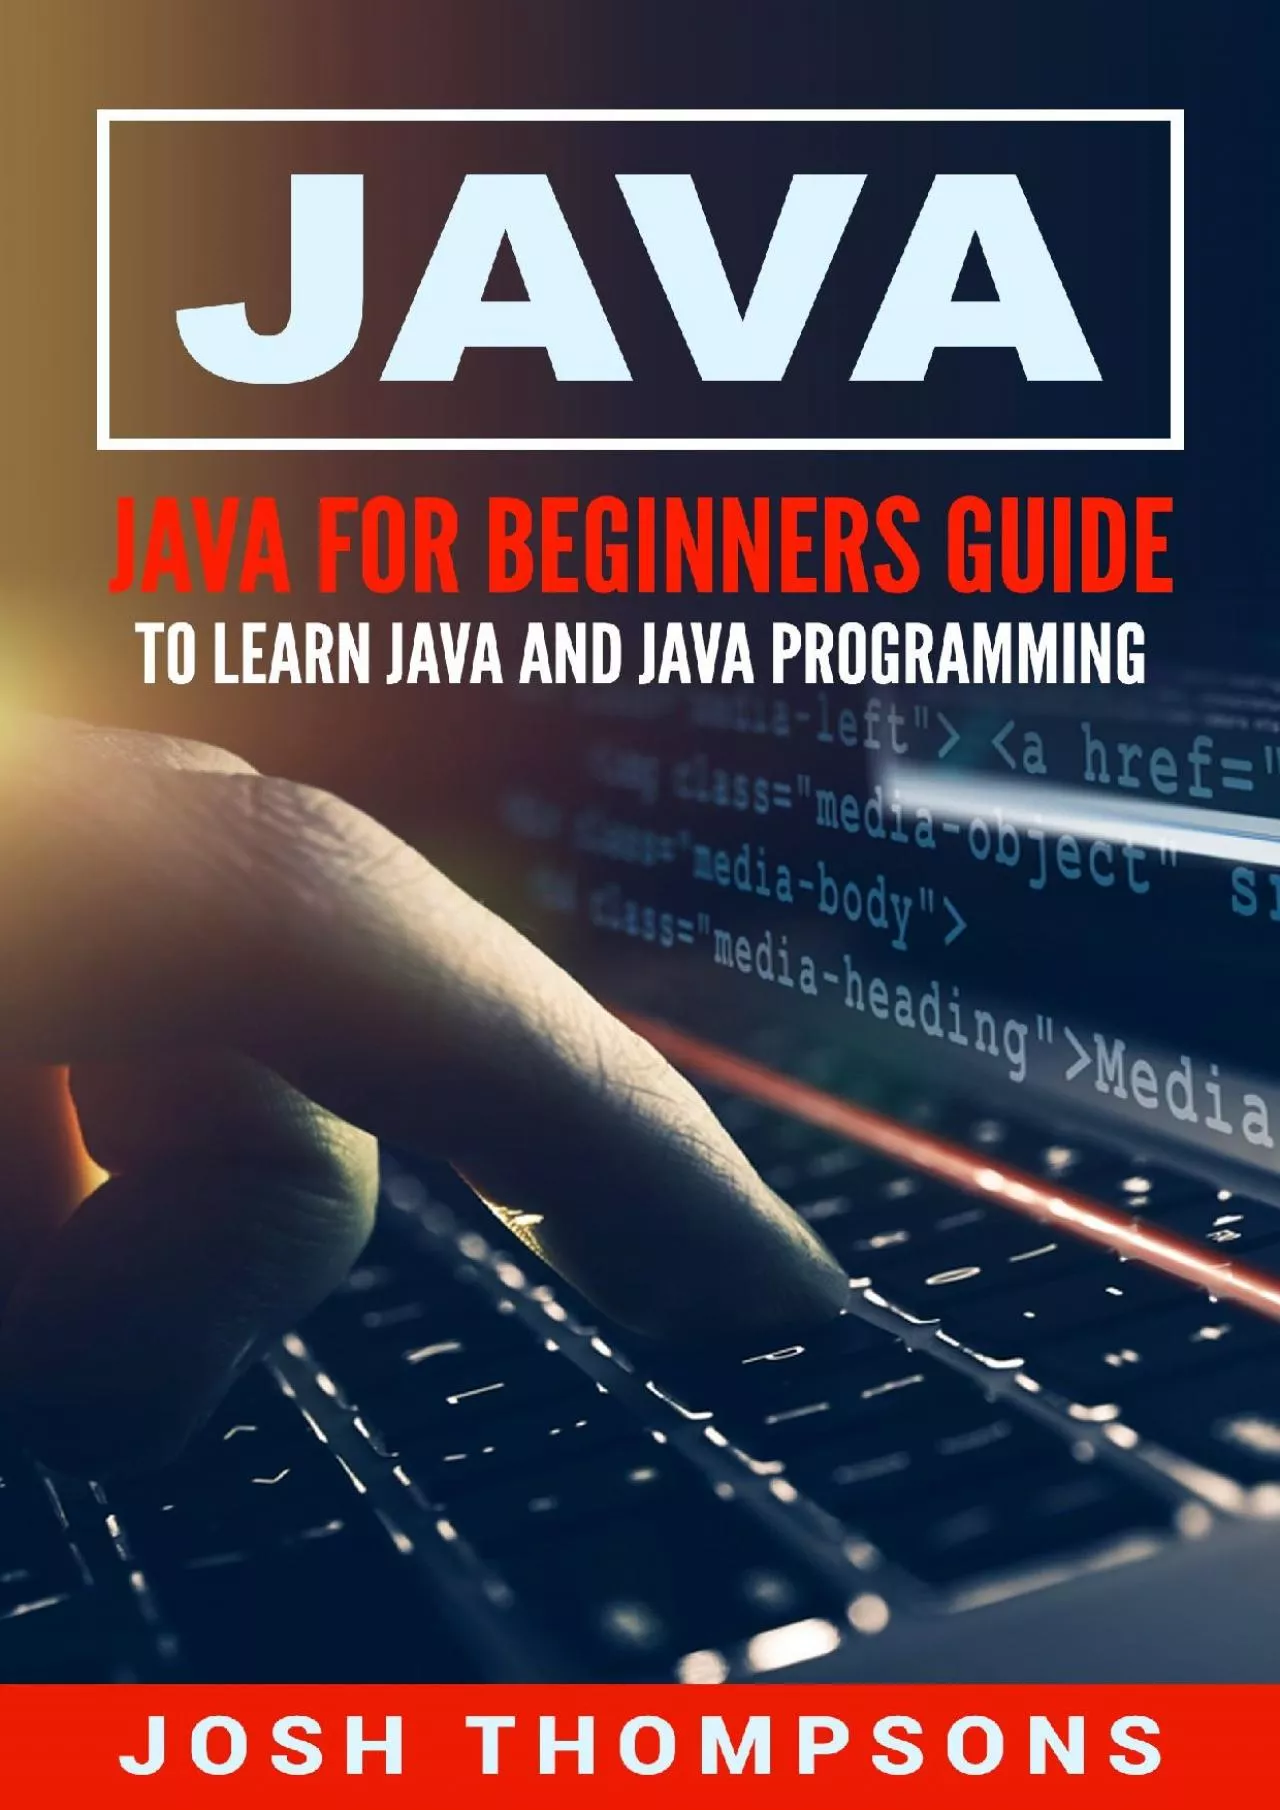 [READING BOOK]-Java: Java For Beginners Guide To Learn Java And Java Programming (Java